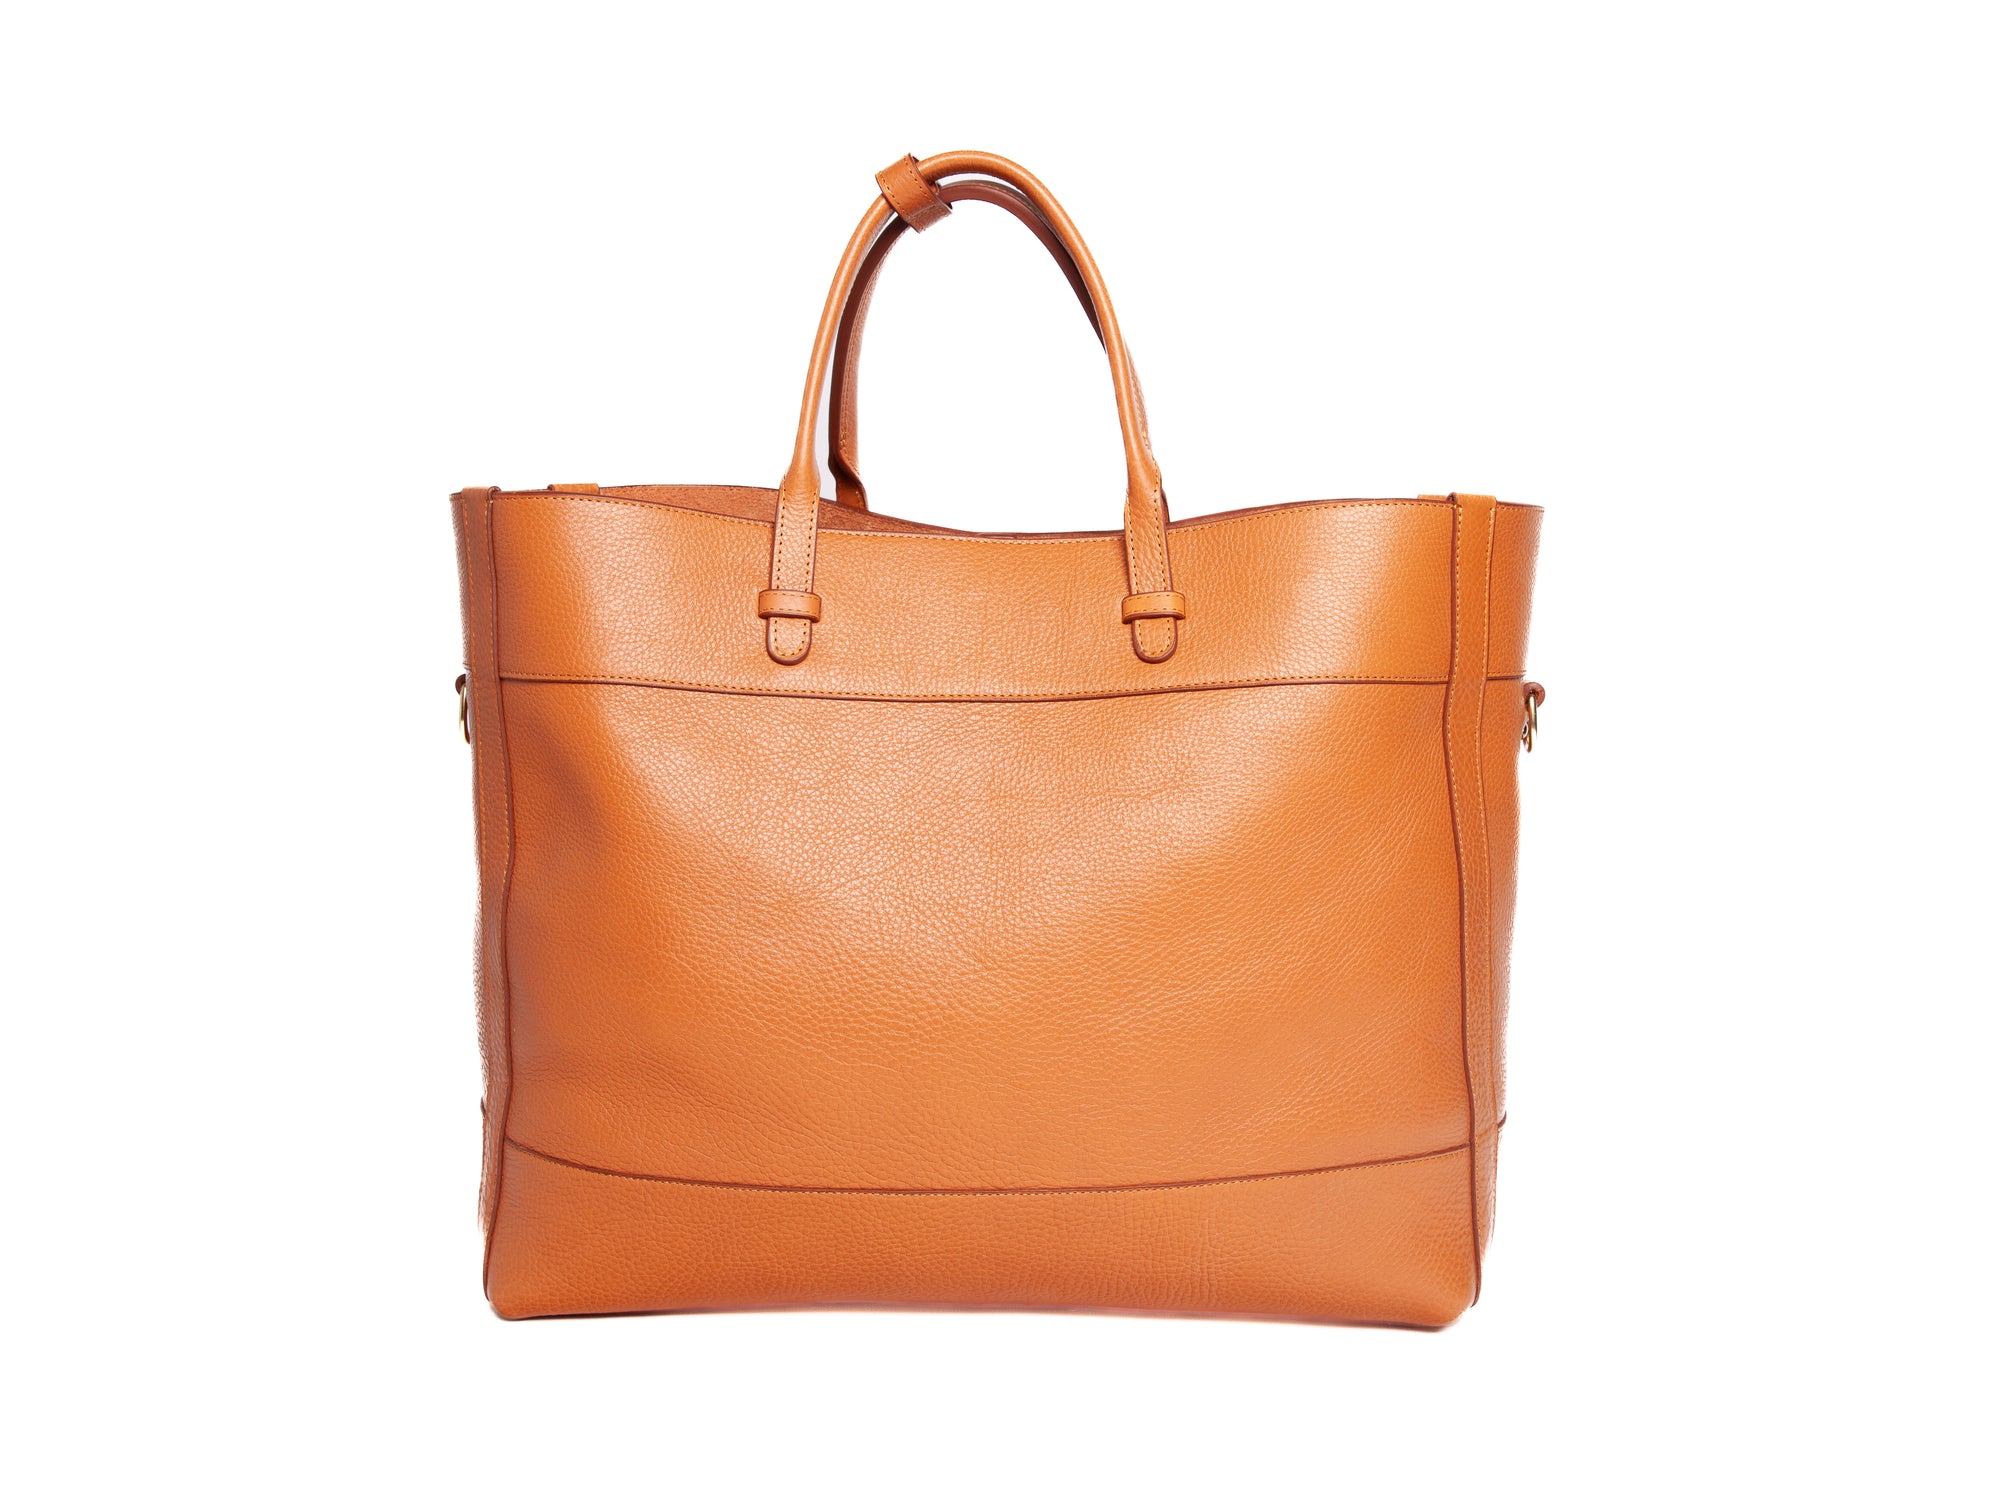 The 929 Tote Camel